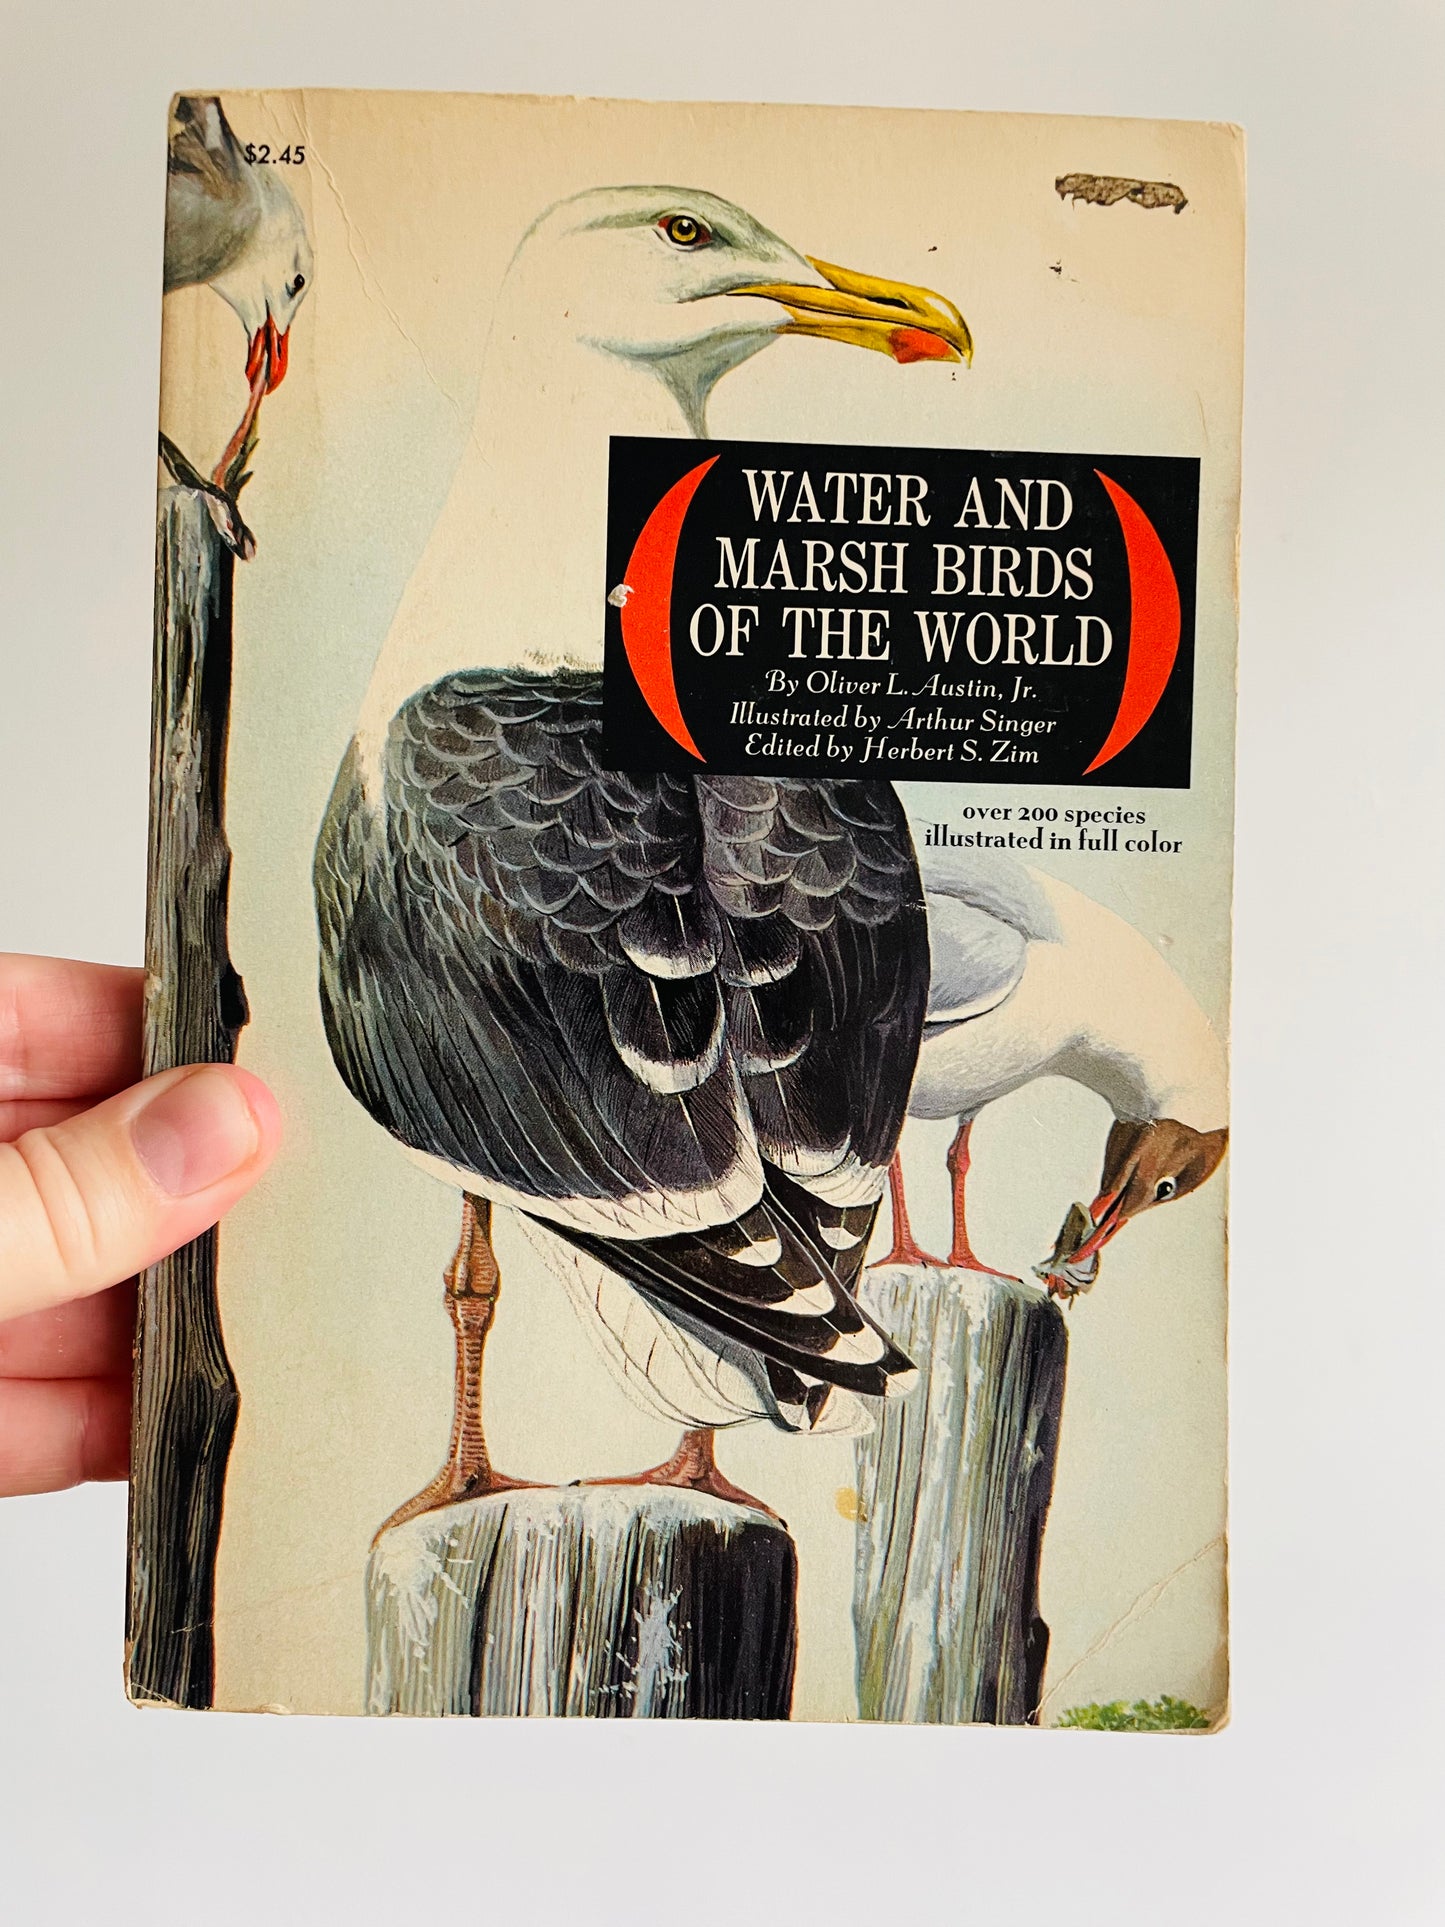 Water And Marsh Birds of The World Book by Oliver L. Austin, Jr. & Illustrated by Arthur Singer (1967)